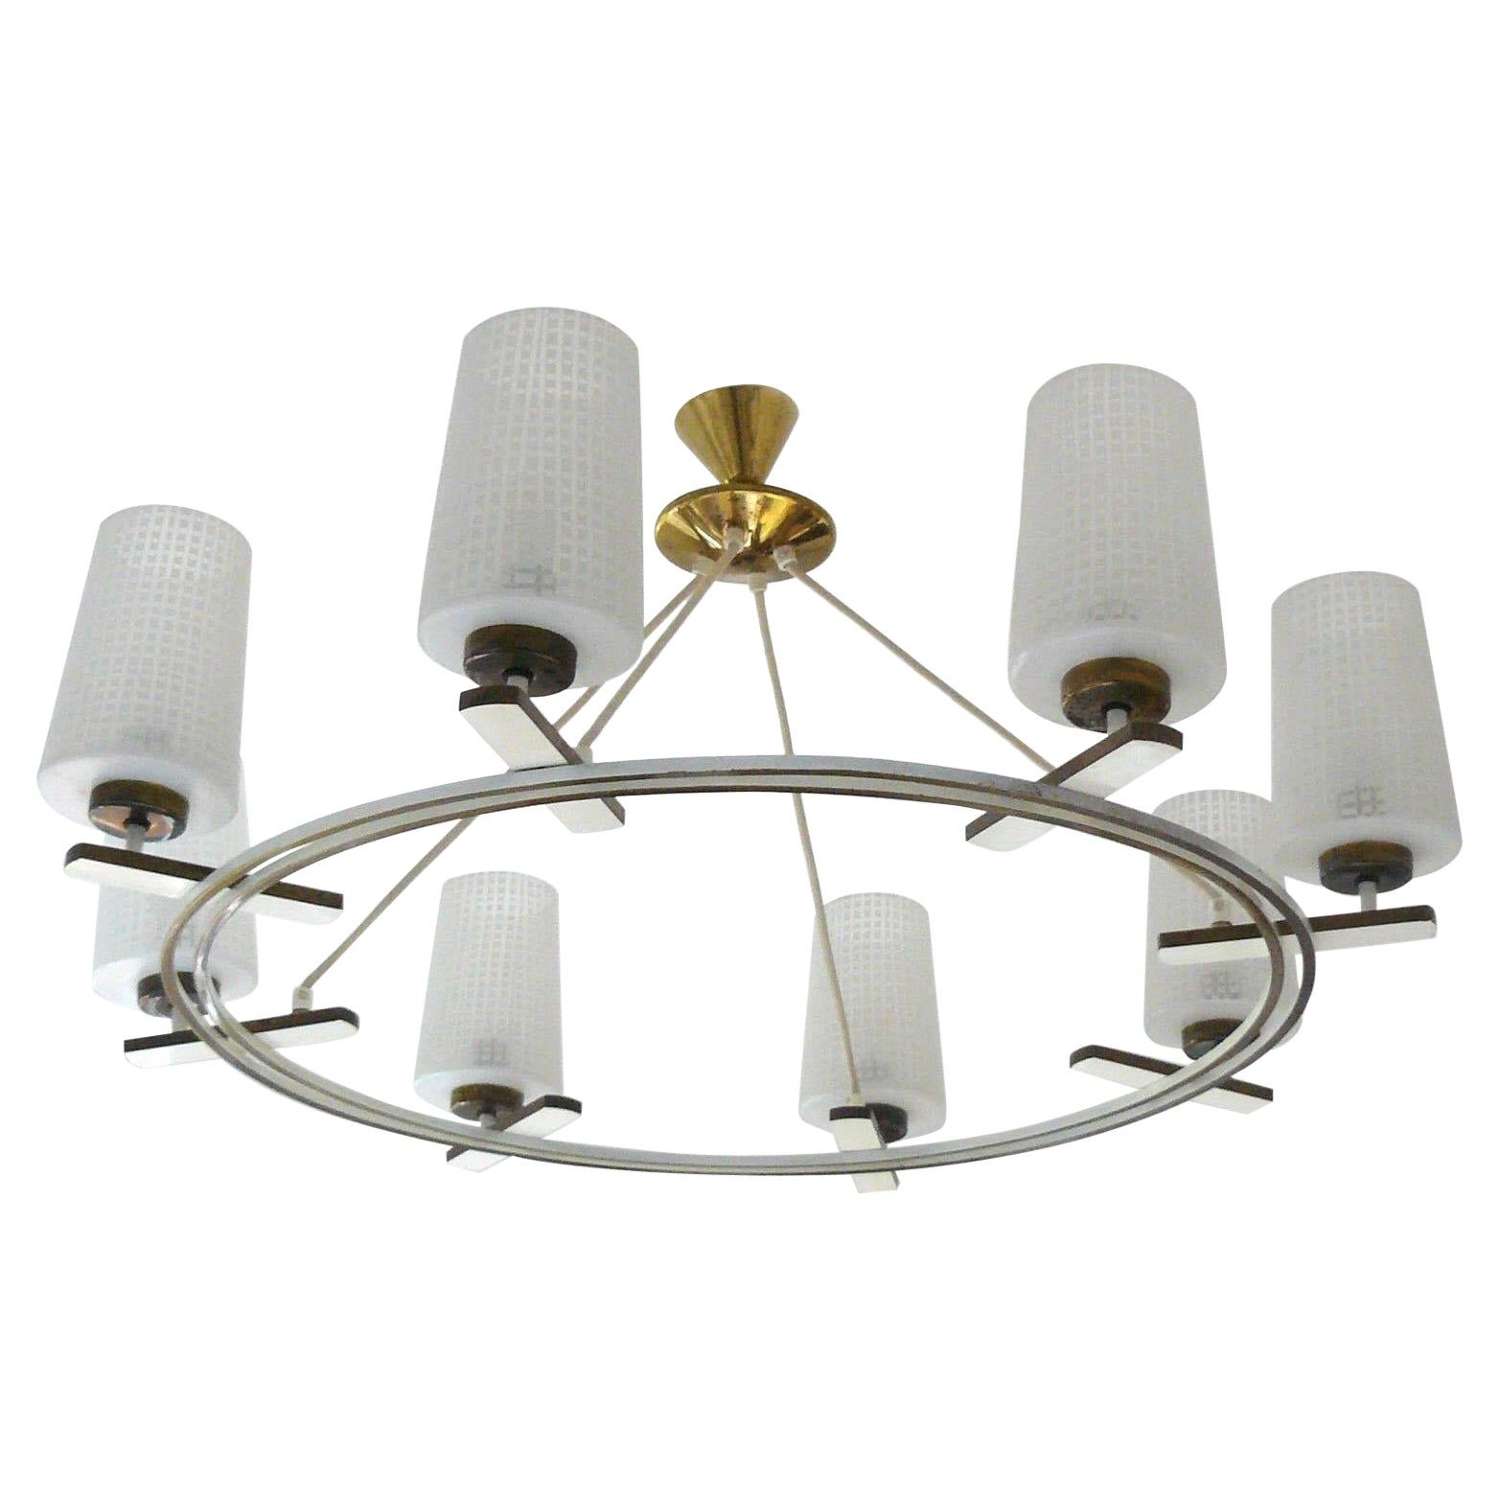 Large 1950's Chandelier with Opalescent Shades on Brass and Cream Frame